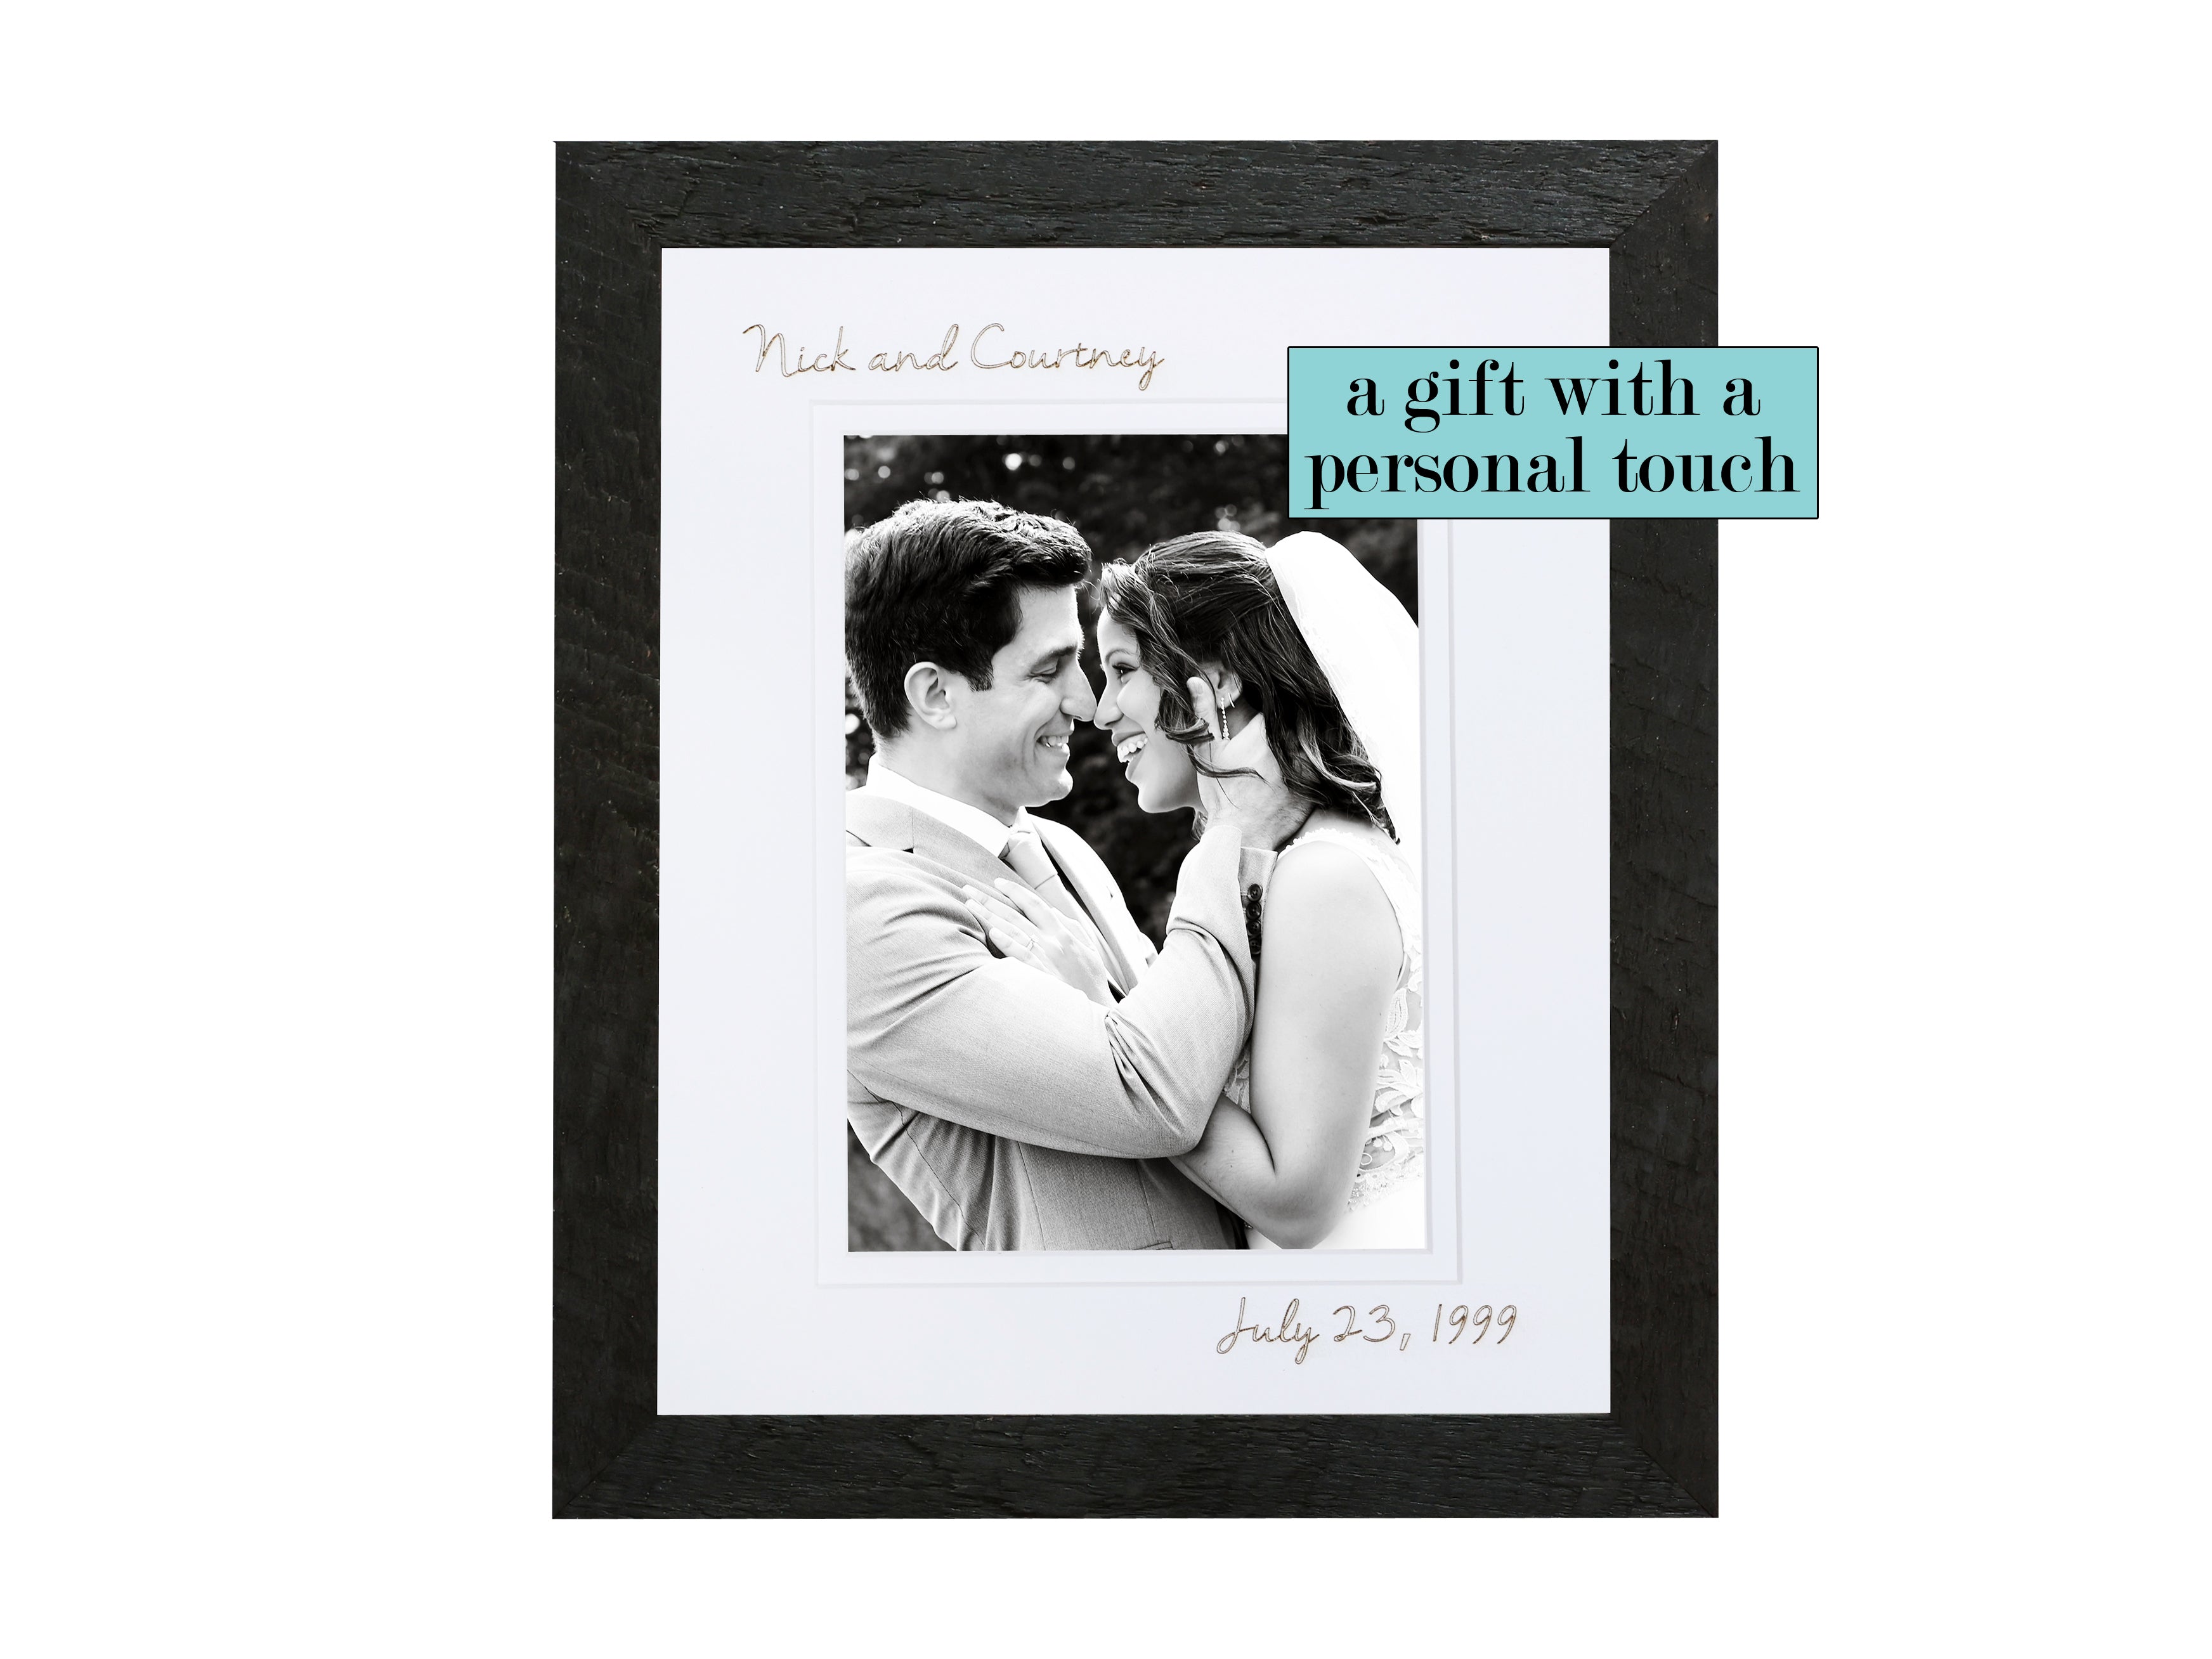 Personalized Rustic Frame 8x10 - showcases a 5x7 A great gift for engaged couples, newlweds and wedding anniversaries